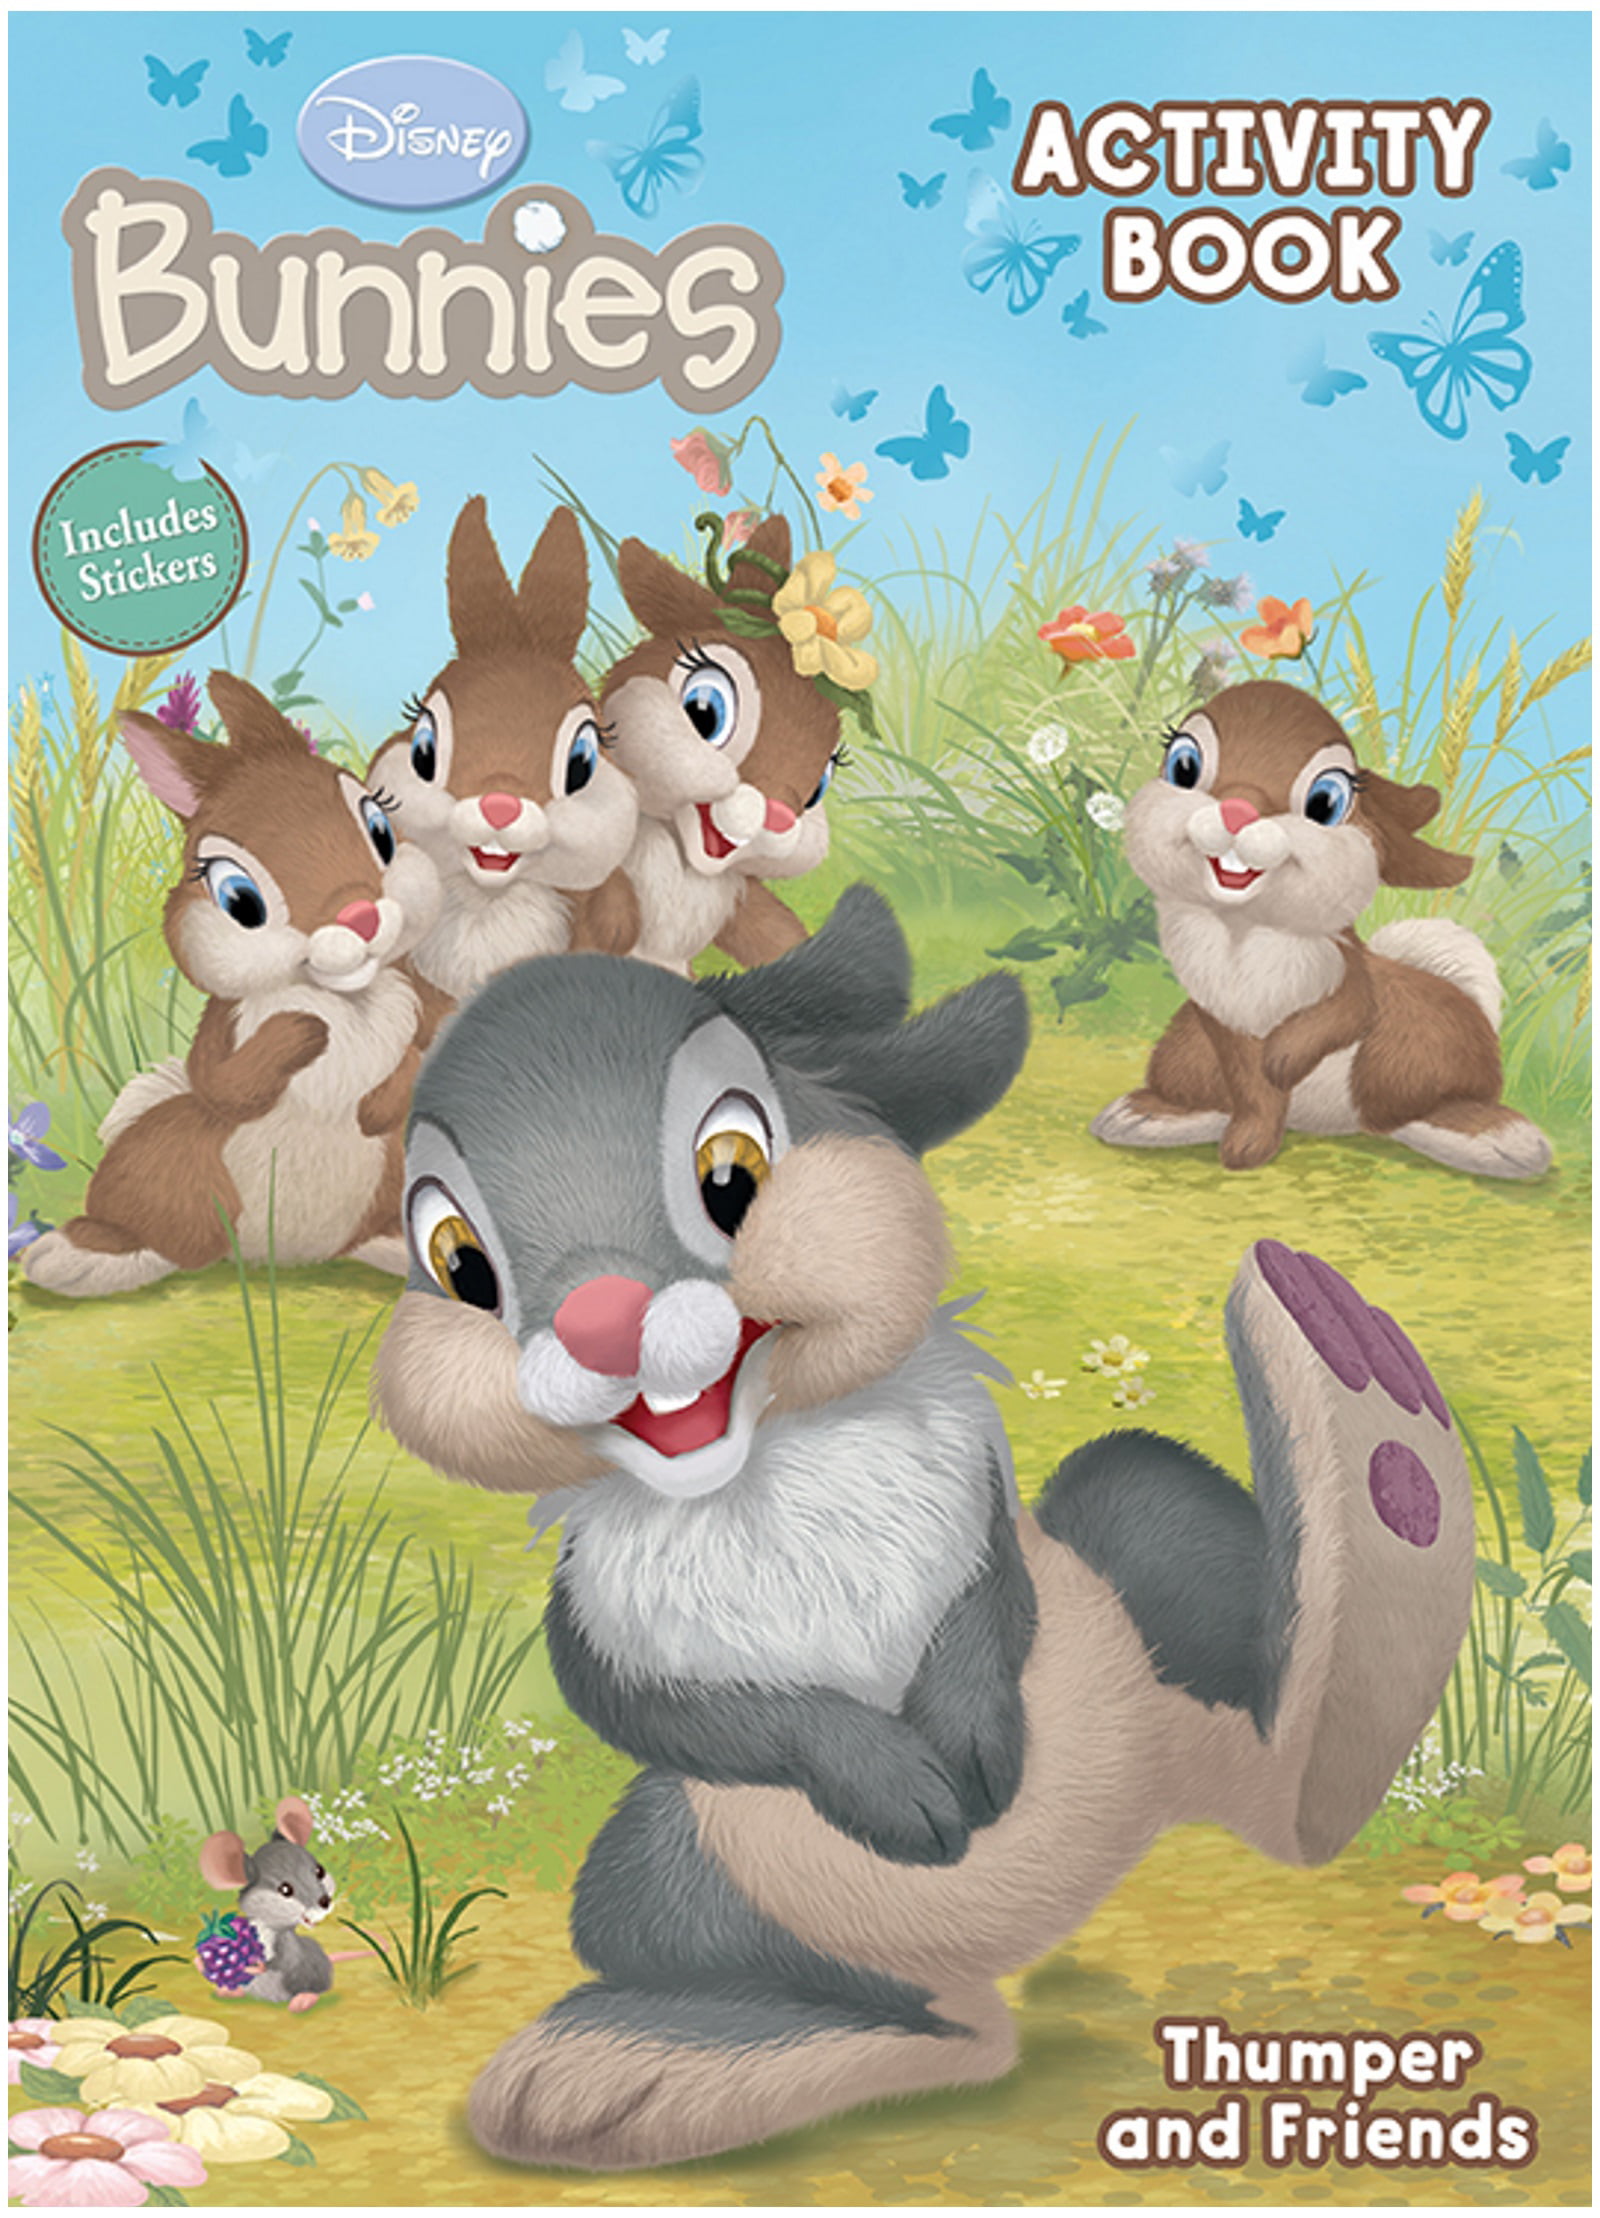 Disney's Bunnies 20 Page Coloring and Activity Book with Stickers ... - Otakugadgets